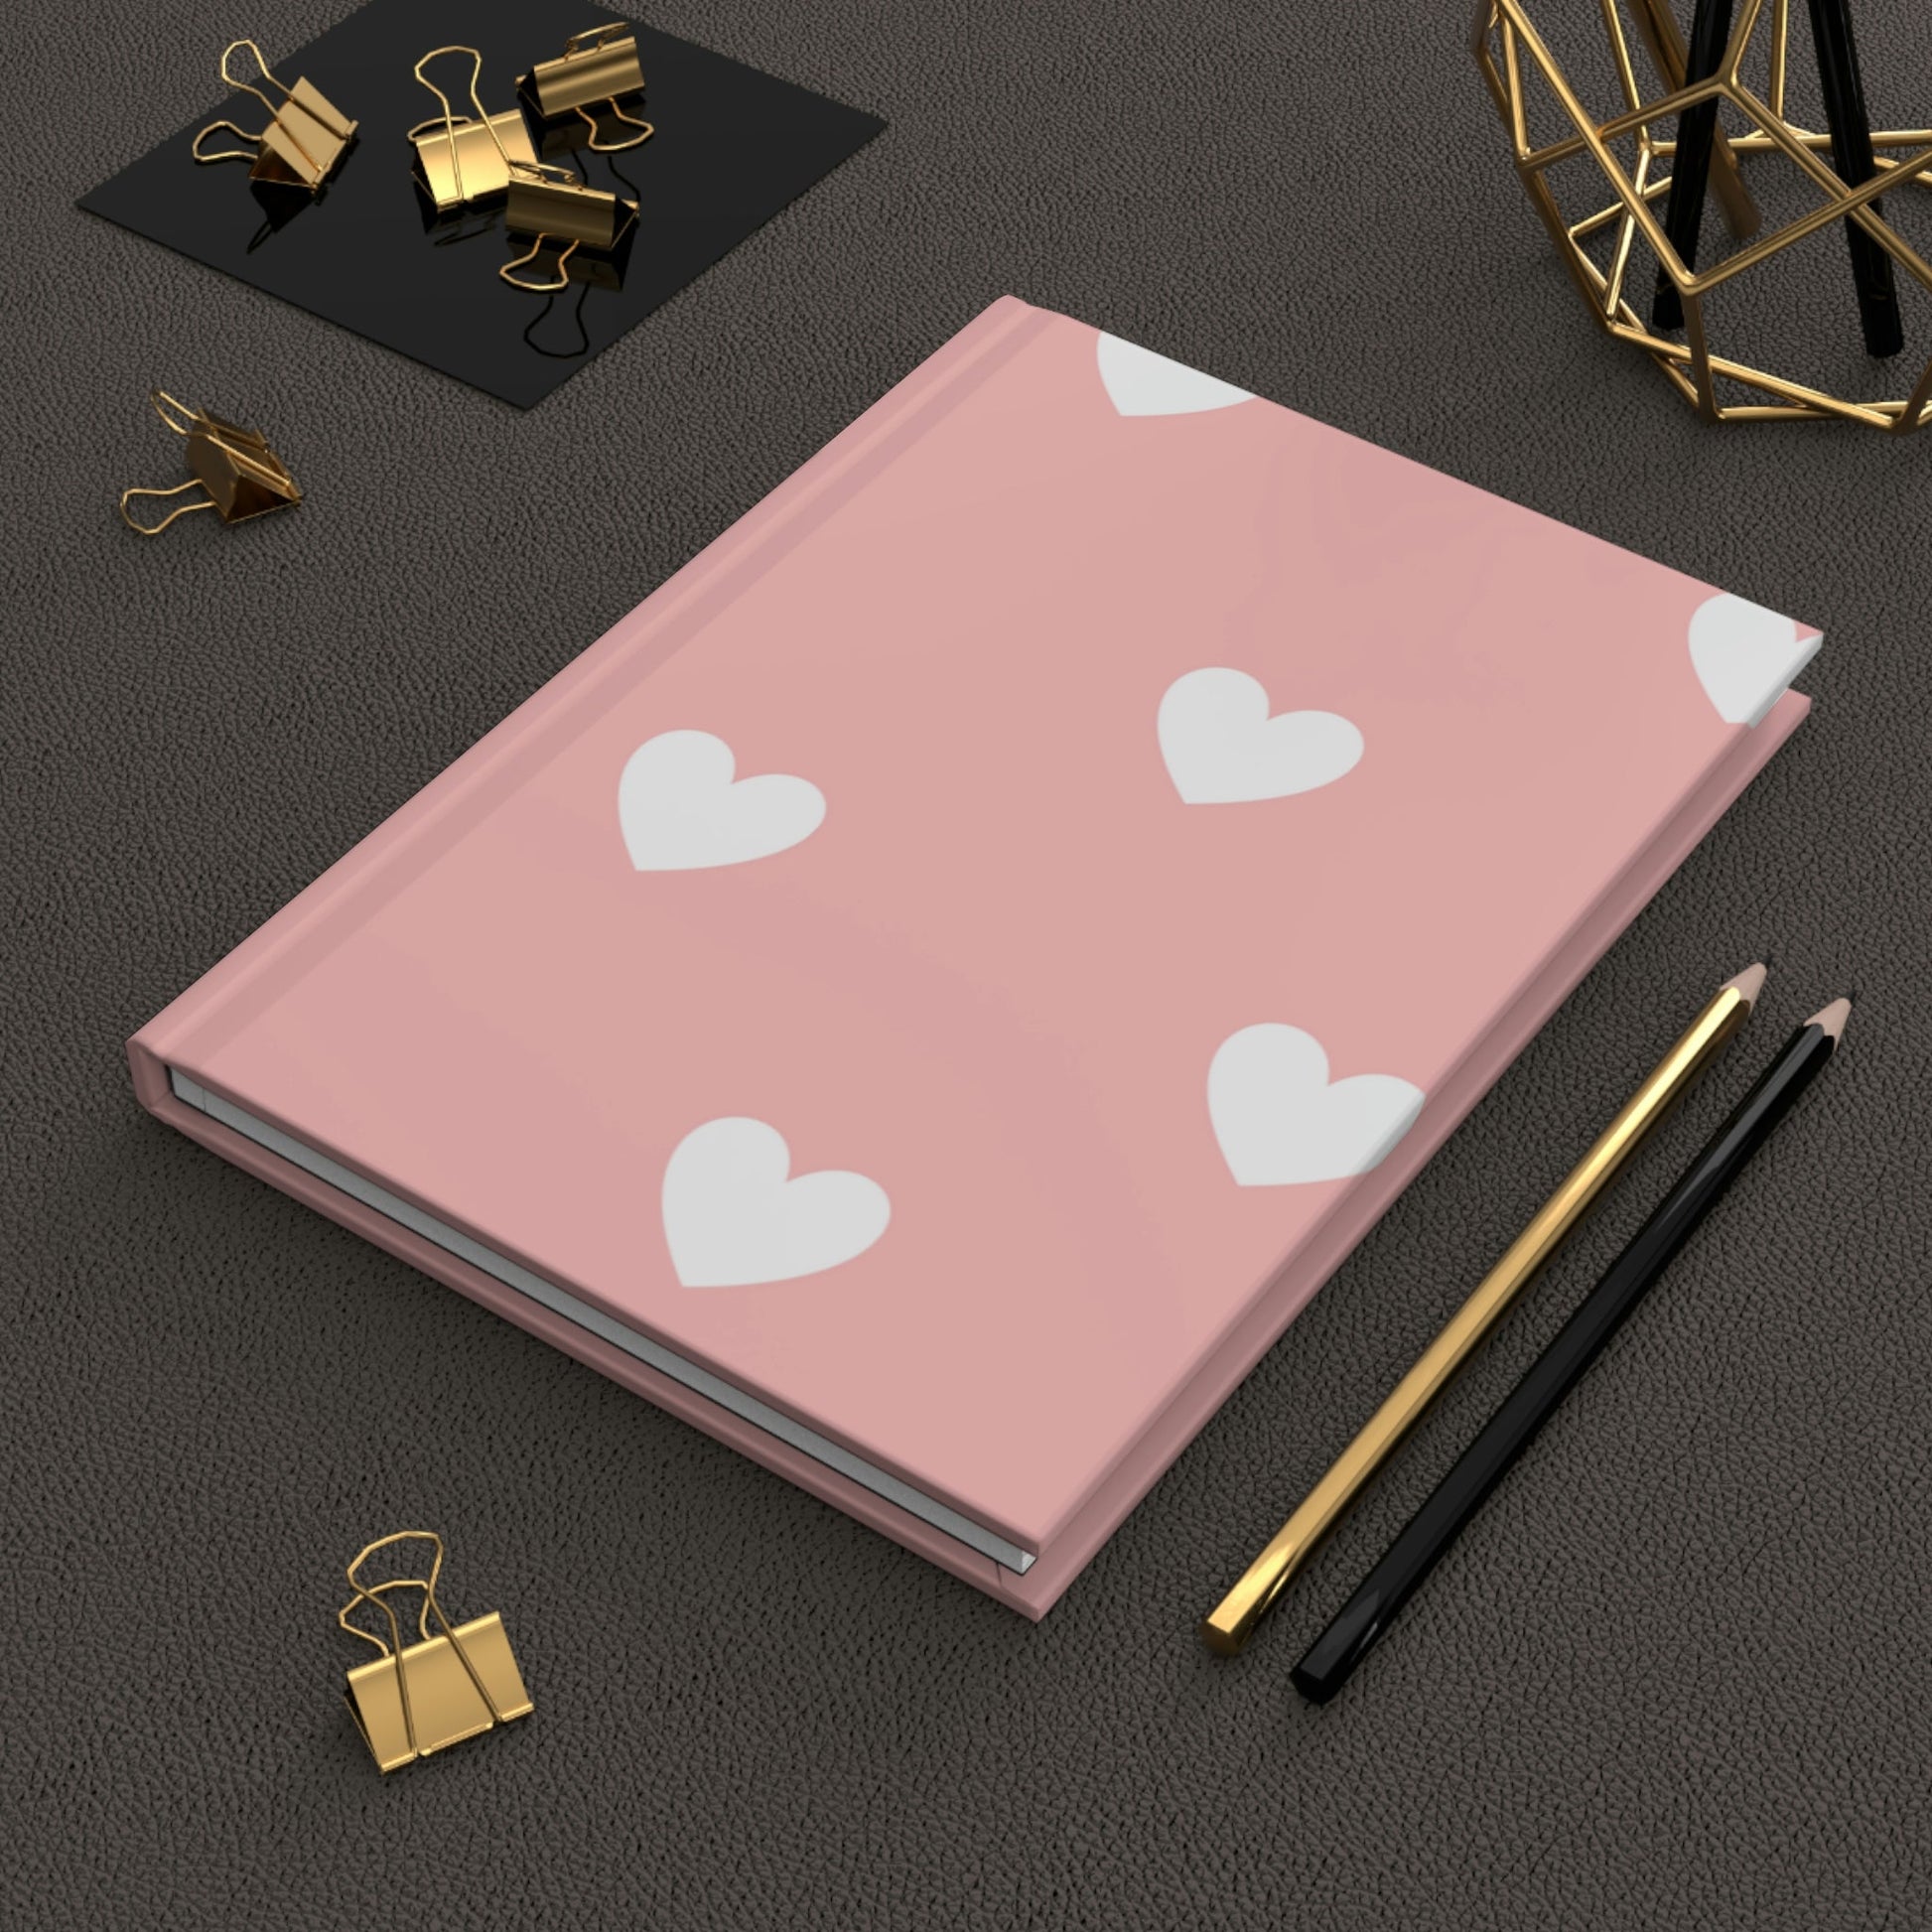 Sending My Love Hardcover Matte Journal Paper products Pink Sweetheart